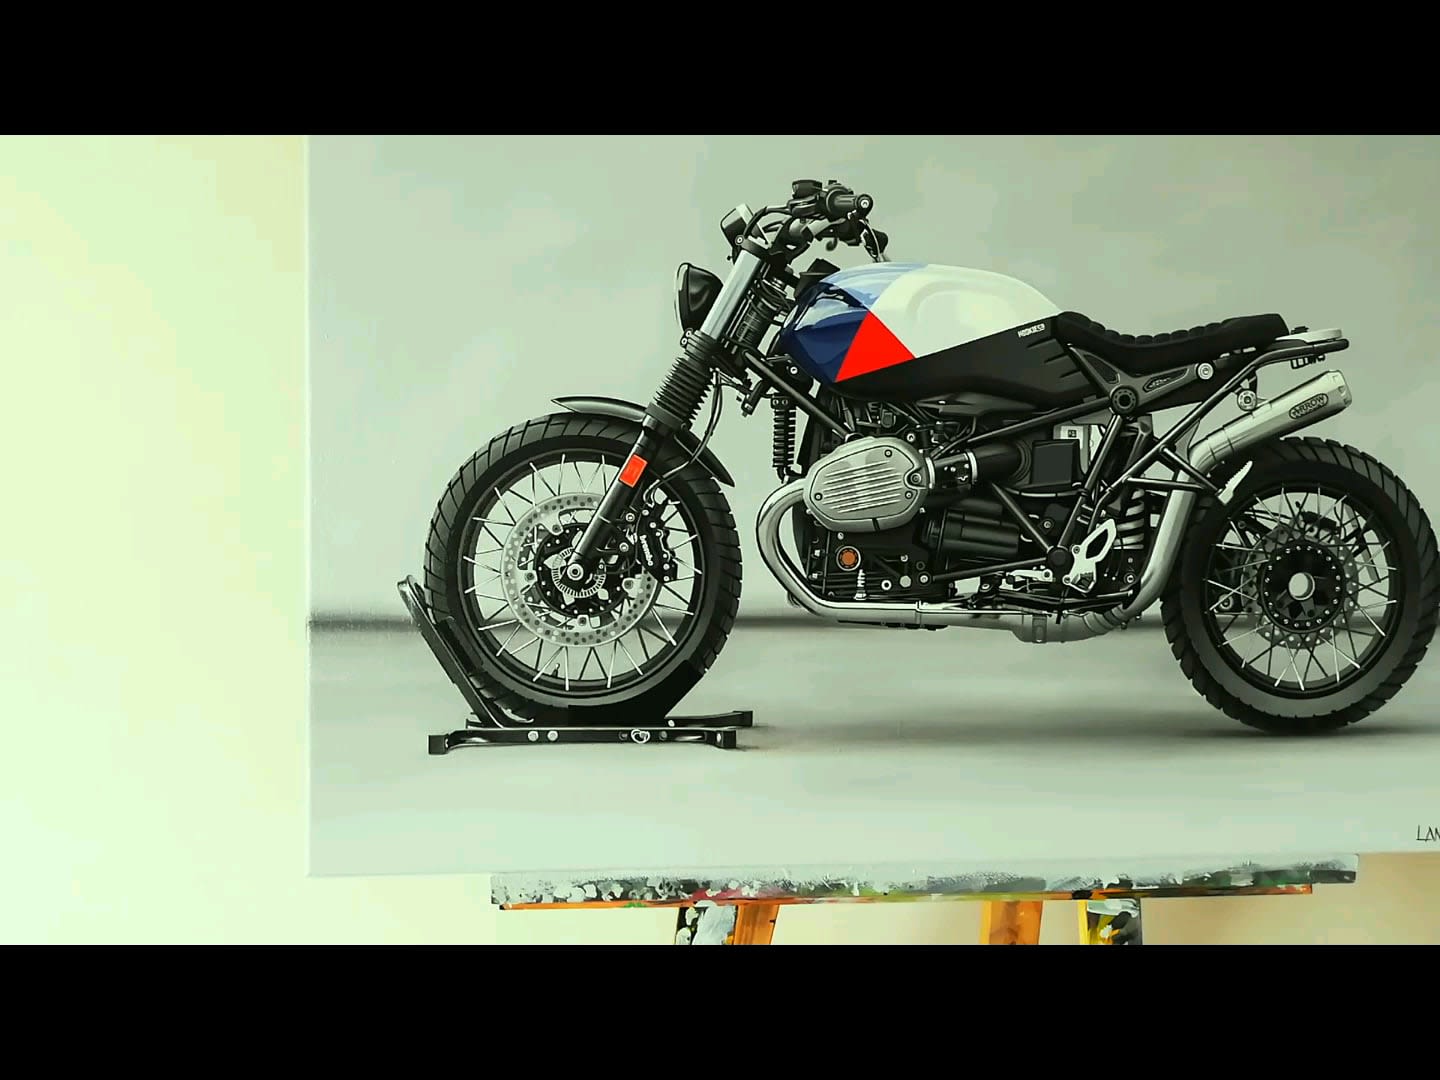 Check out my latest Motorcycle painting. The 2018 BMW R NineT Scrambler. This piece is 100% Hand painted with Acrylic Paint on 84..4 Canvas. Hope you guys love it. Cheers .